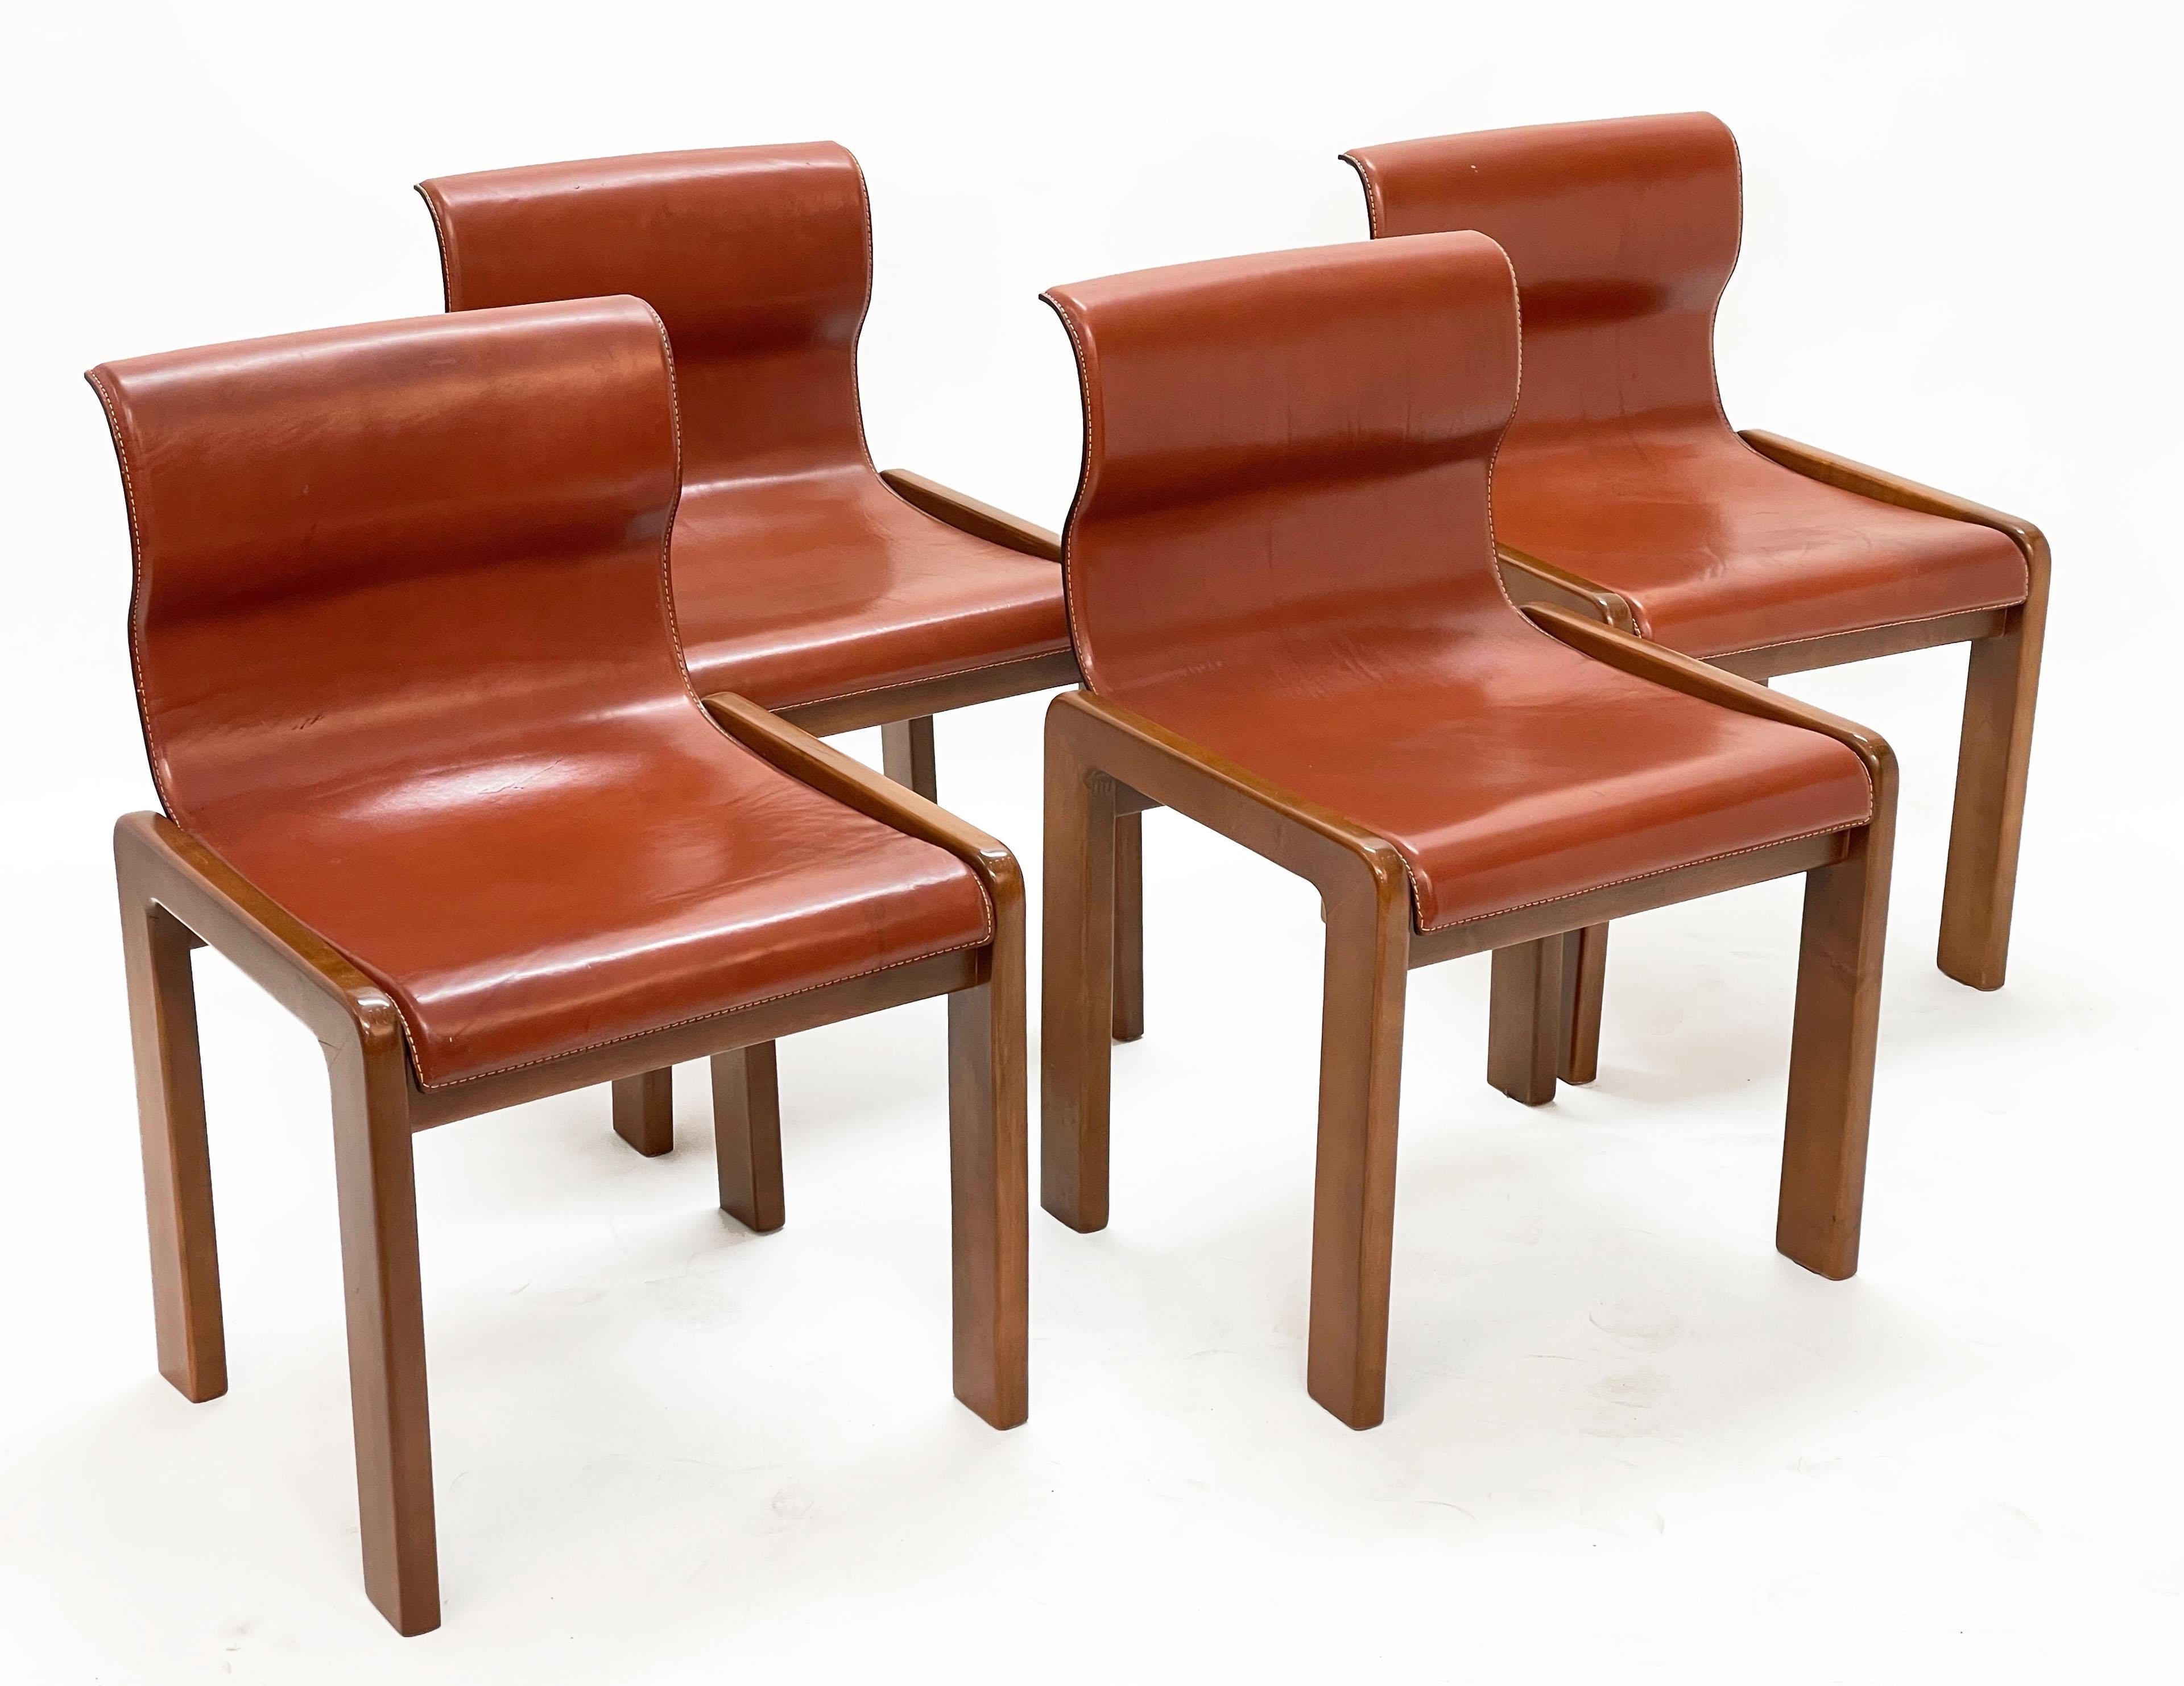 Amazing set of 4 chairs in brown leather and wood. This fantastic piece was designed in Italy in 1966 by Afra & Tobia Scarpa.

This set is incredible because the legs are in wood while the whole seating structure is in brown leather. This use of